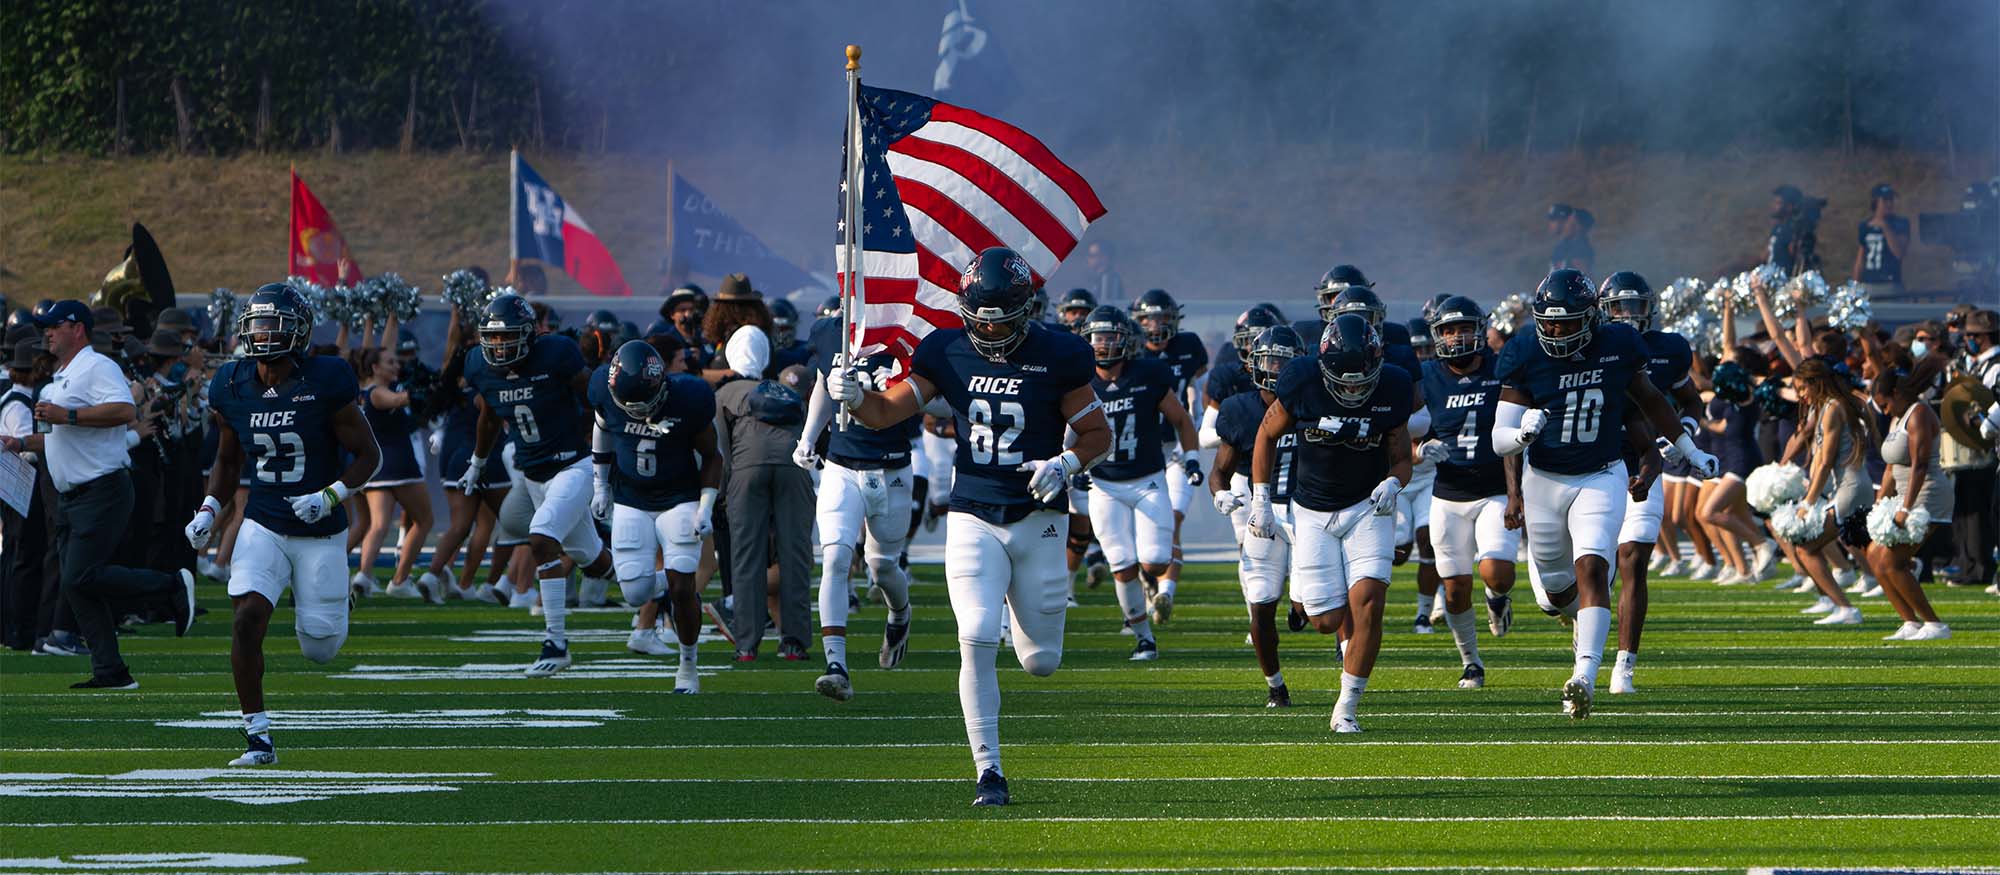 A group of football players run towards the camera on the football field, with the one in front carrying an American flag.